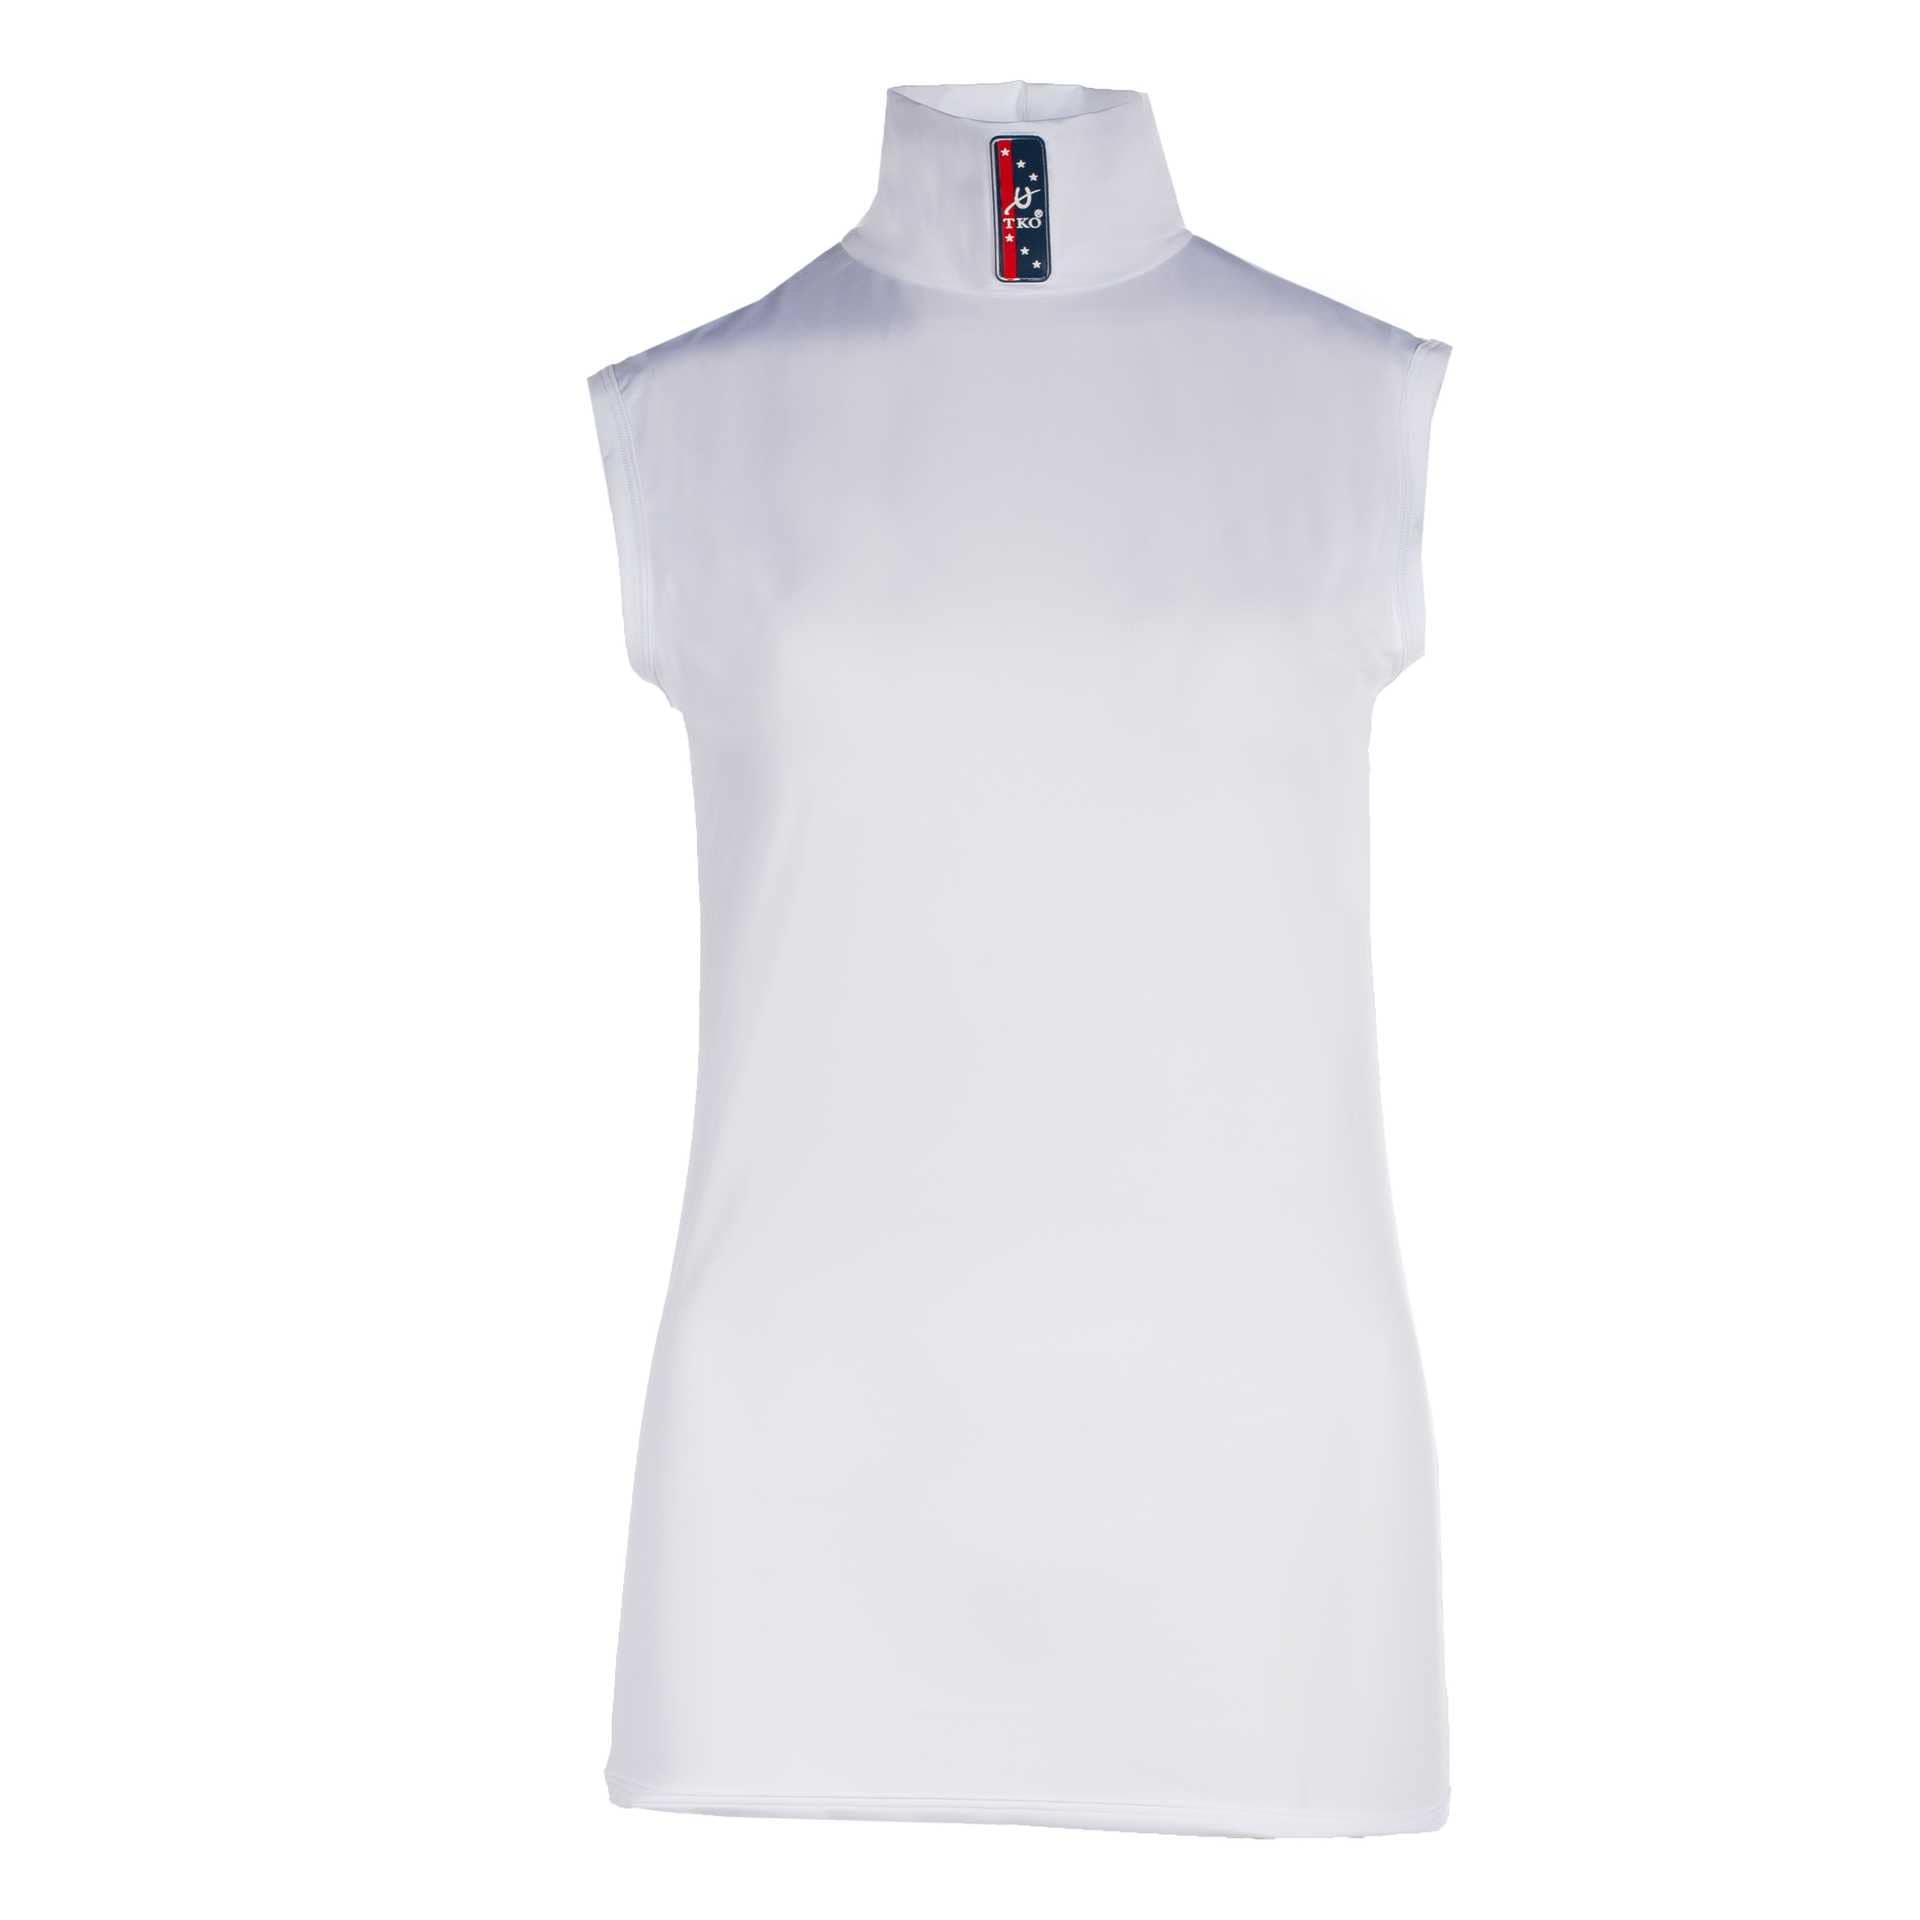 TKO Lycra race shirt without sleeves